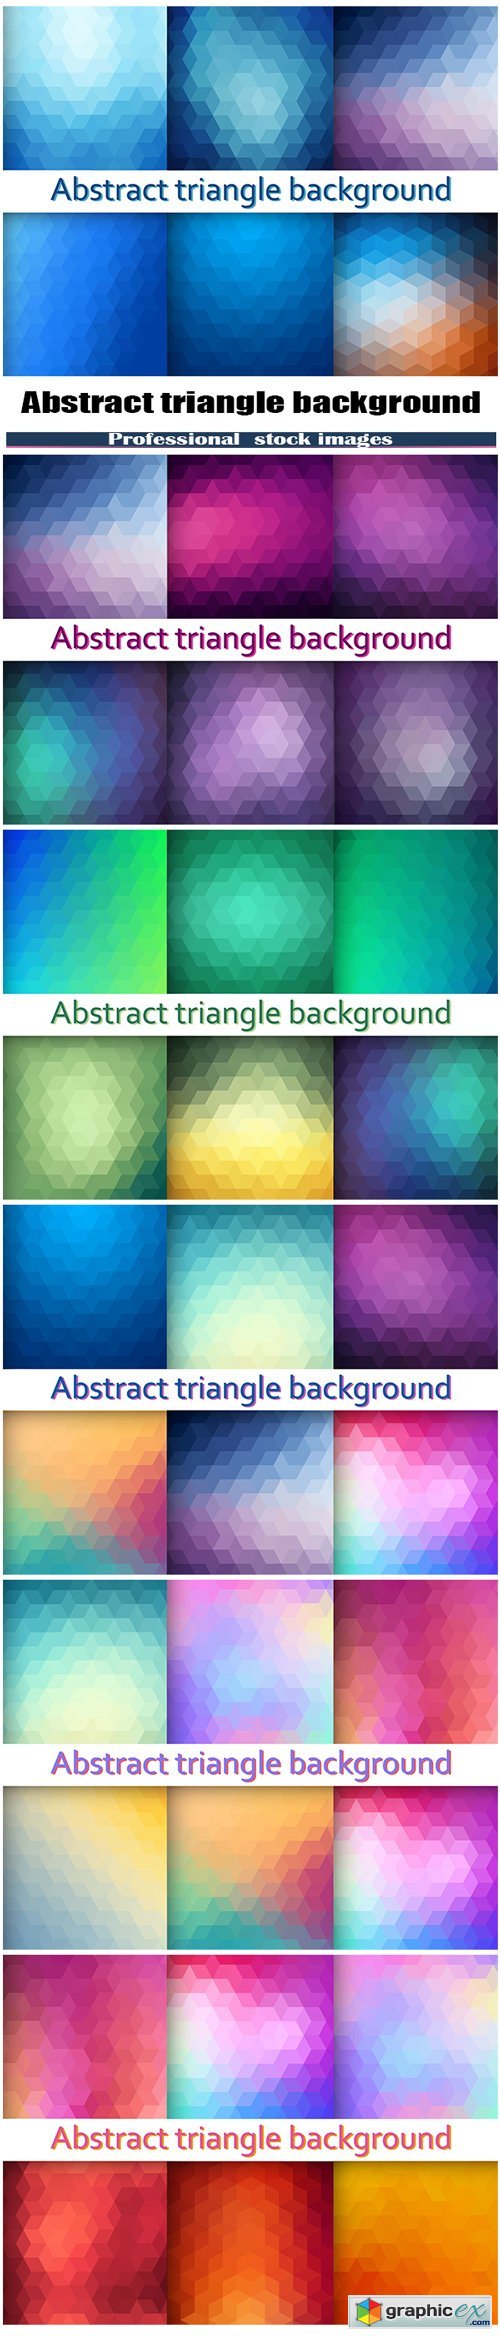 Abstract triangle background set